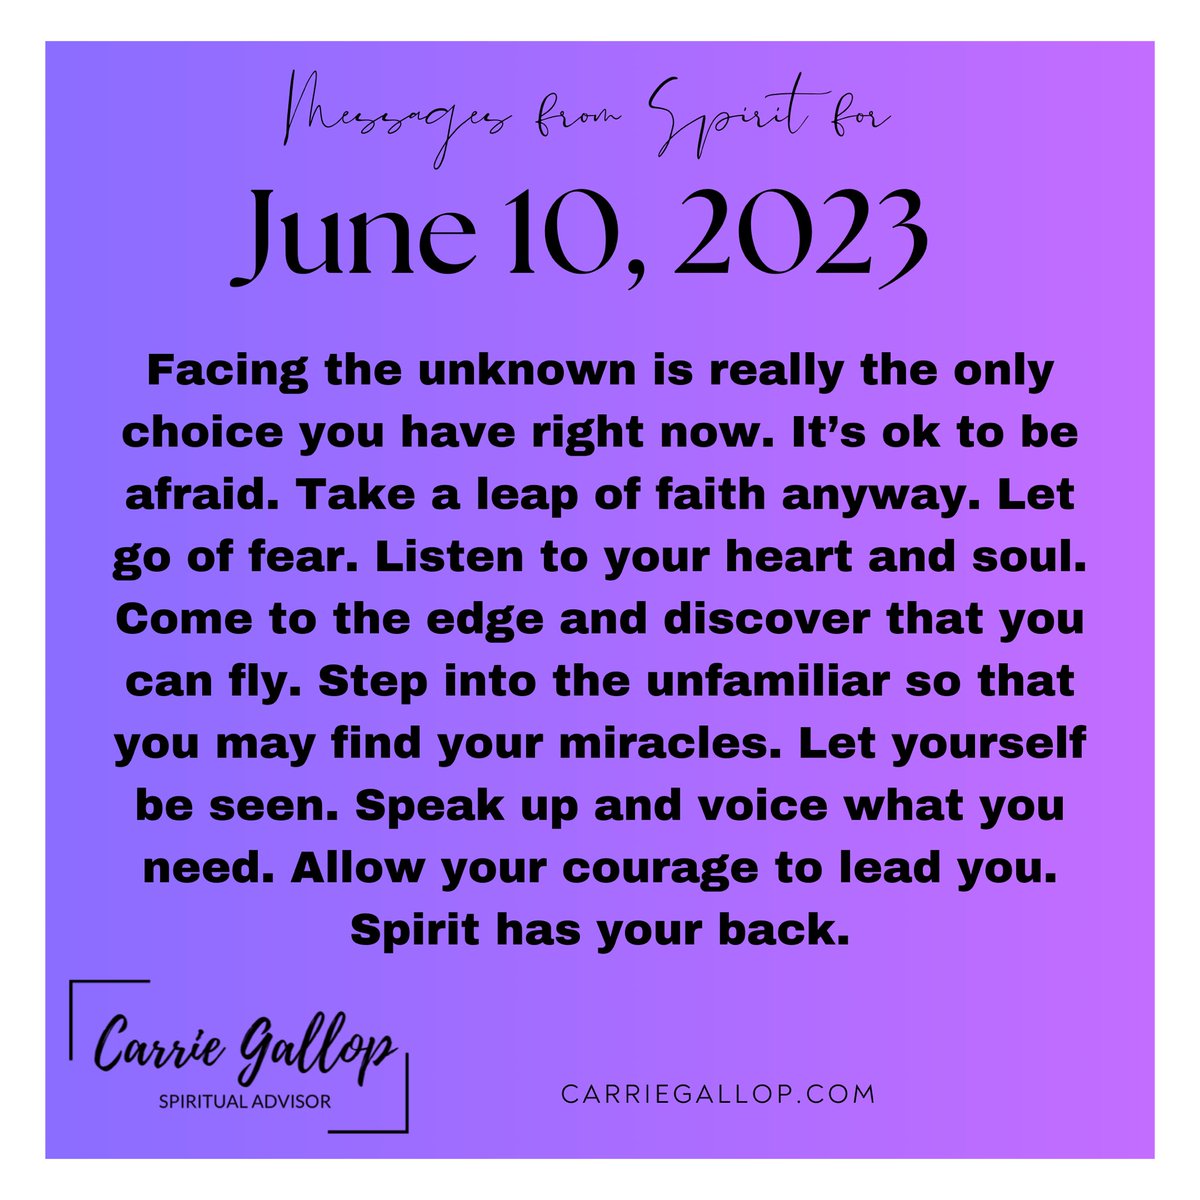 Messages From Spirit for June 10, 2023 ✨

#Daily #Guidance #Message #MessagesFromSpirit #June10 #FaceTheUnknown #ItsOkToBeAfraid #TakeALeapOfFaith #LetGoOfFear #ListenToYourHeart #Soul #ComeToTheEdge #Discover #YouCanFly #Unfamiliar #Find #Miracles #BeSeen #SpeakUp